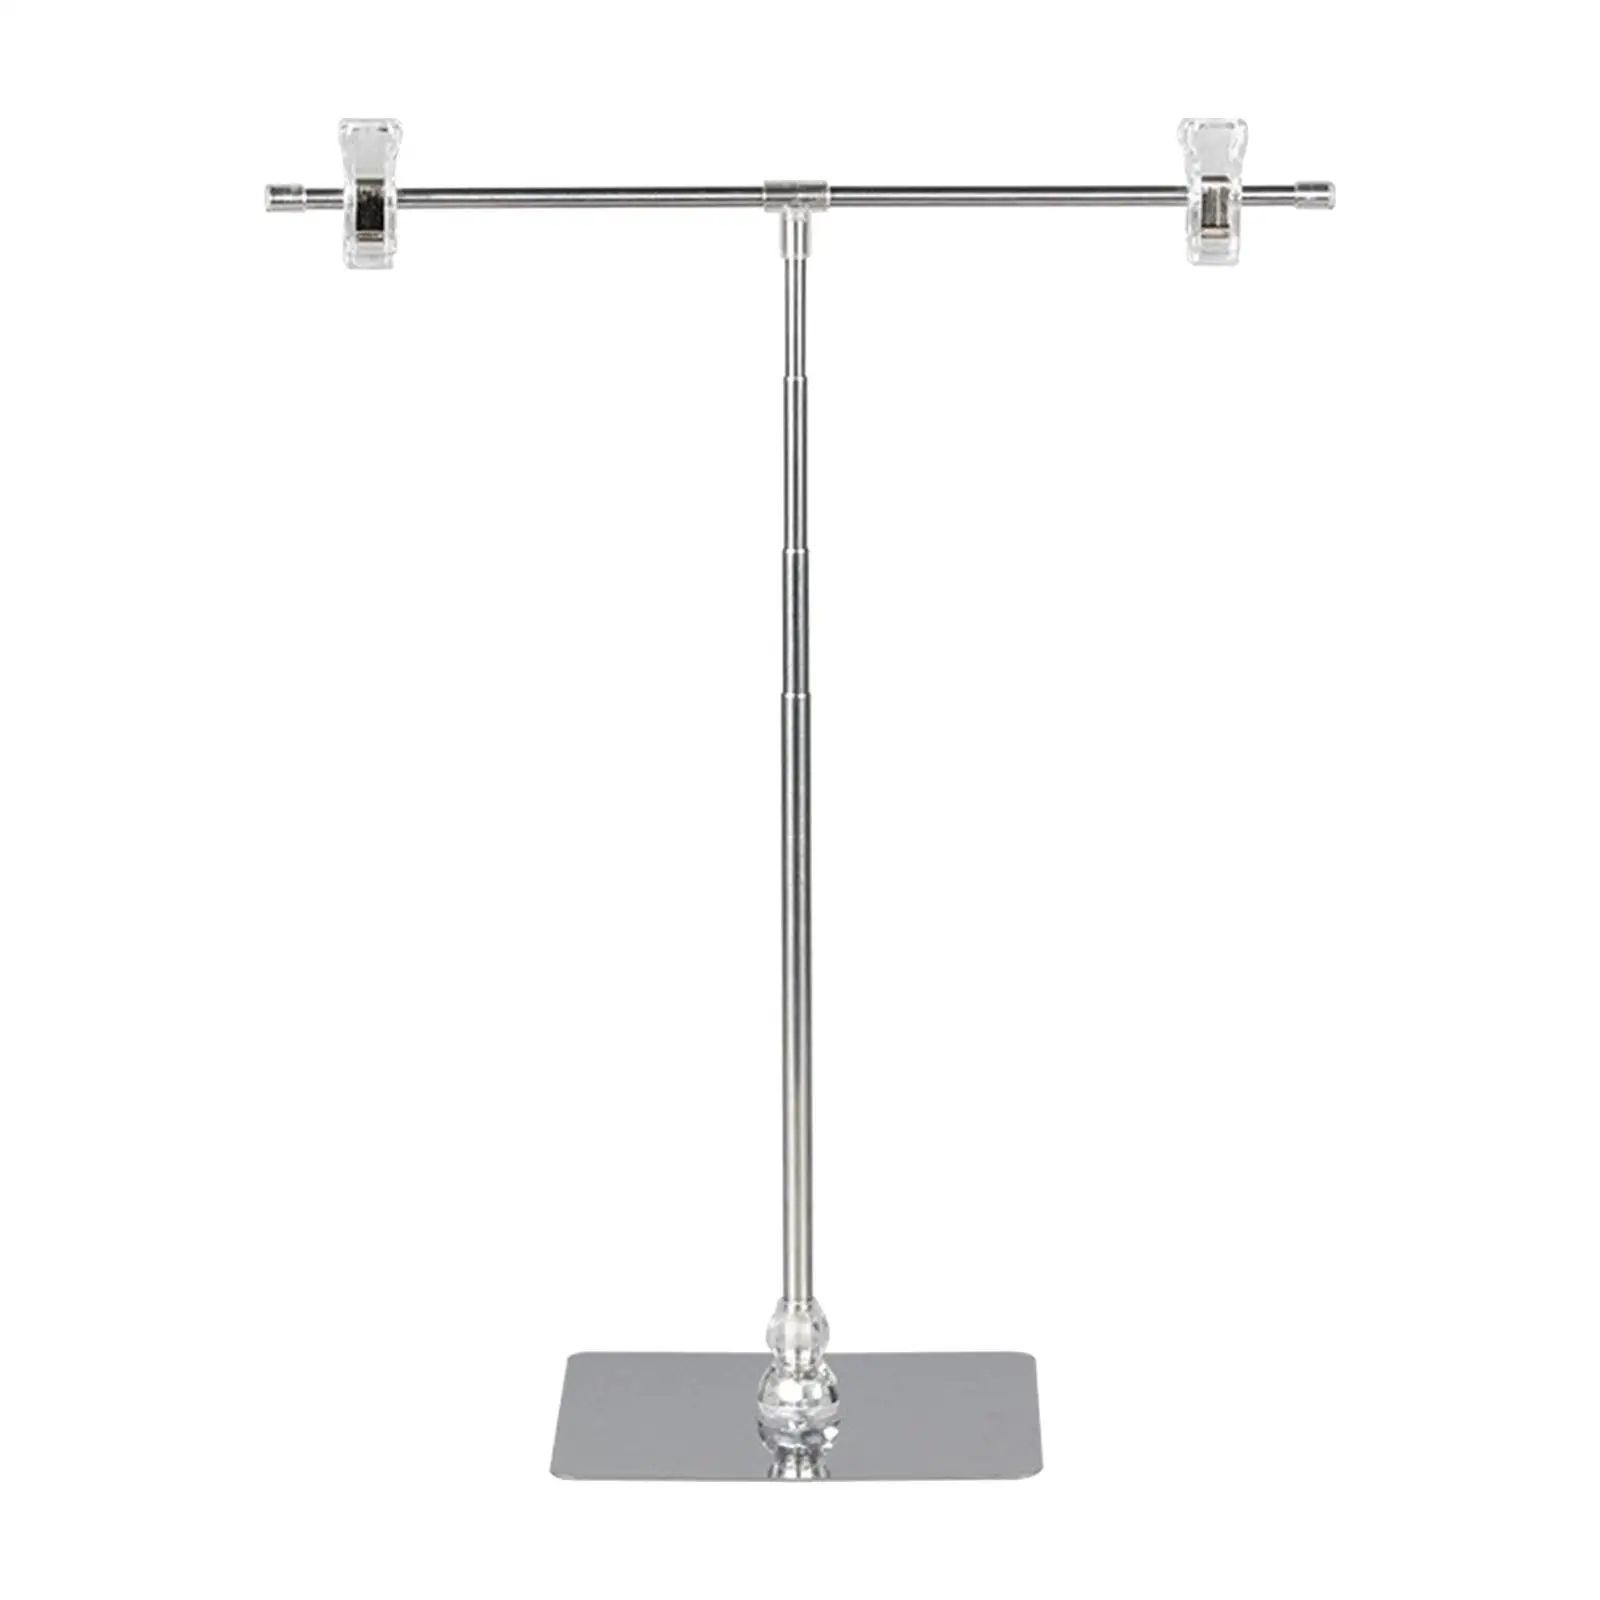 Adjustable Poster Stand T Sign Menu Holder Stainless Steel Advertisement Rack Banner Stand Floorstanding for Store Counter Bars